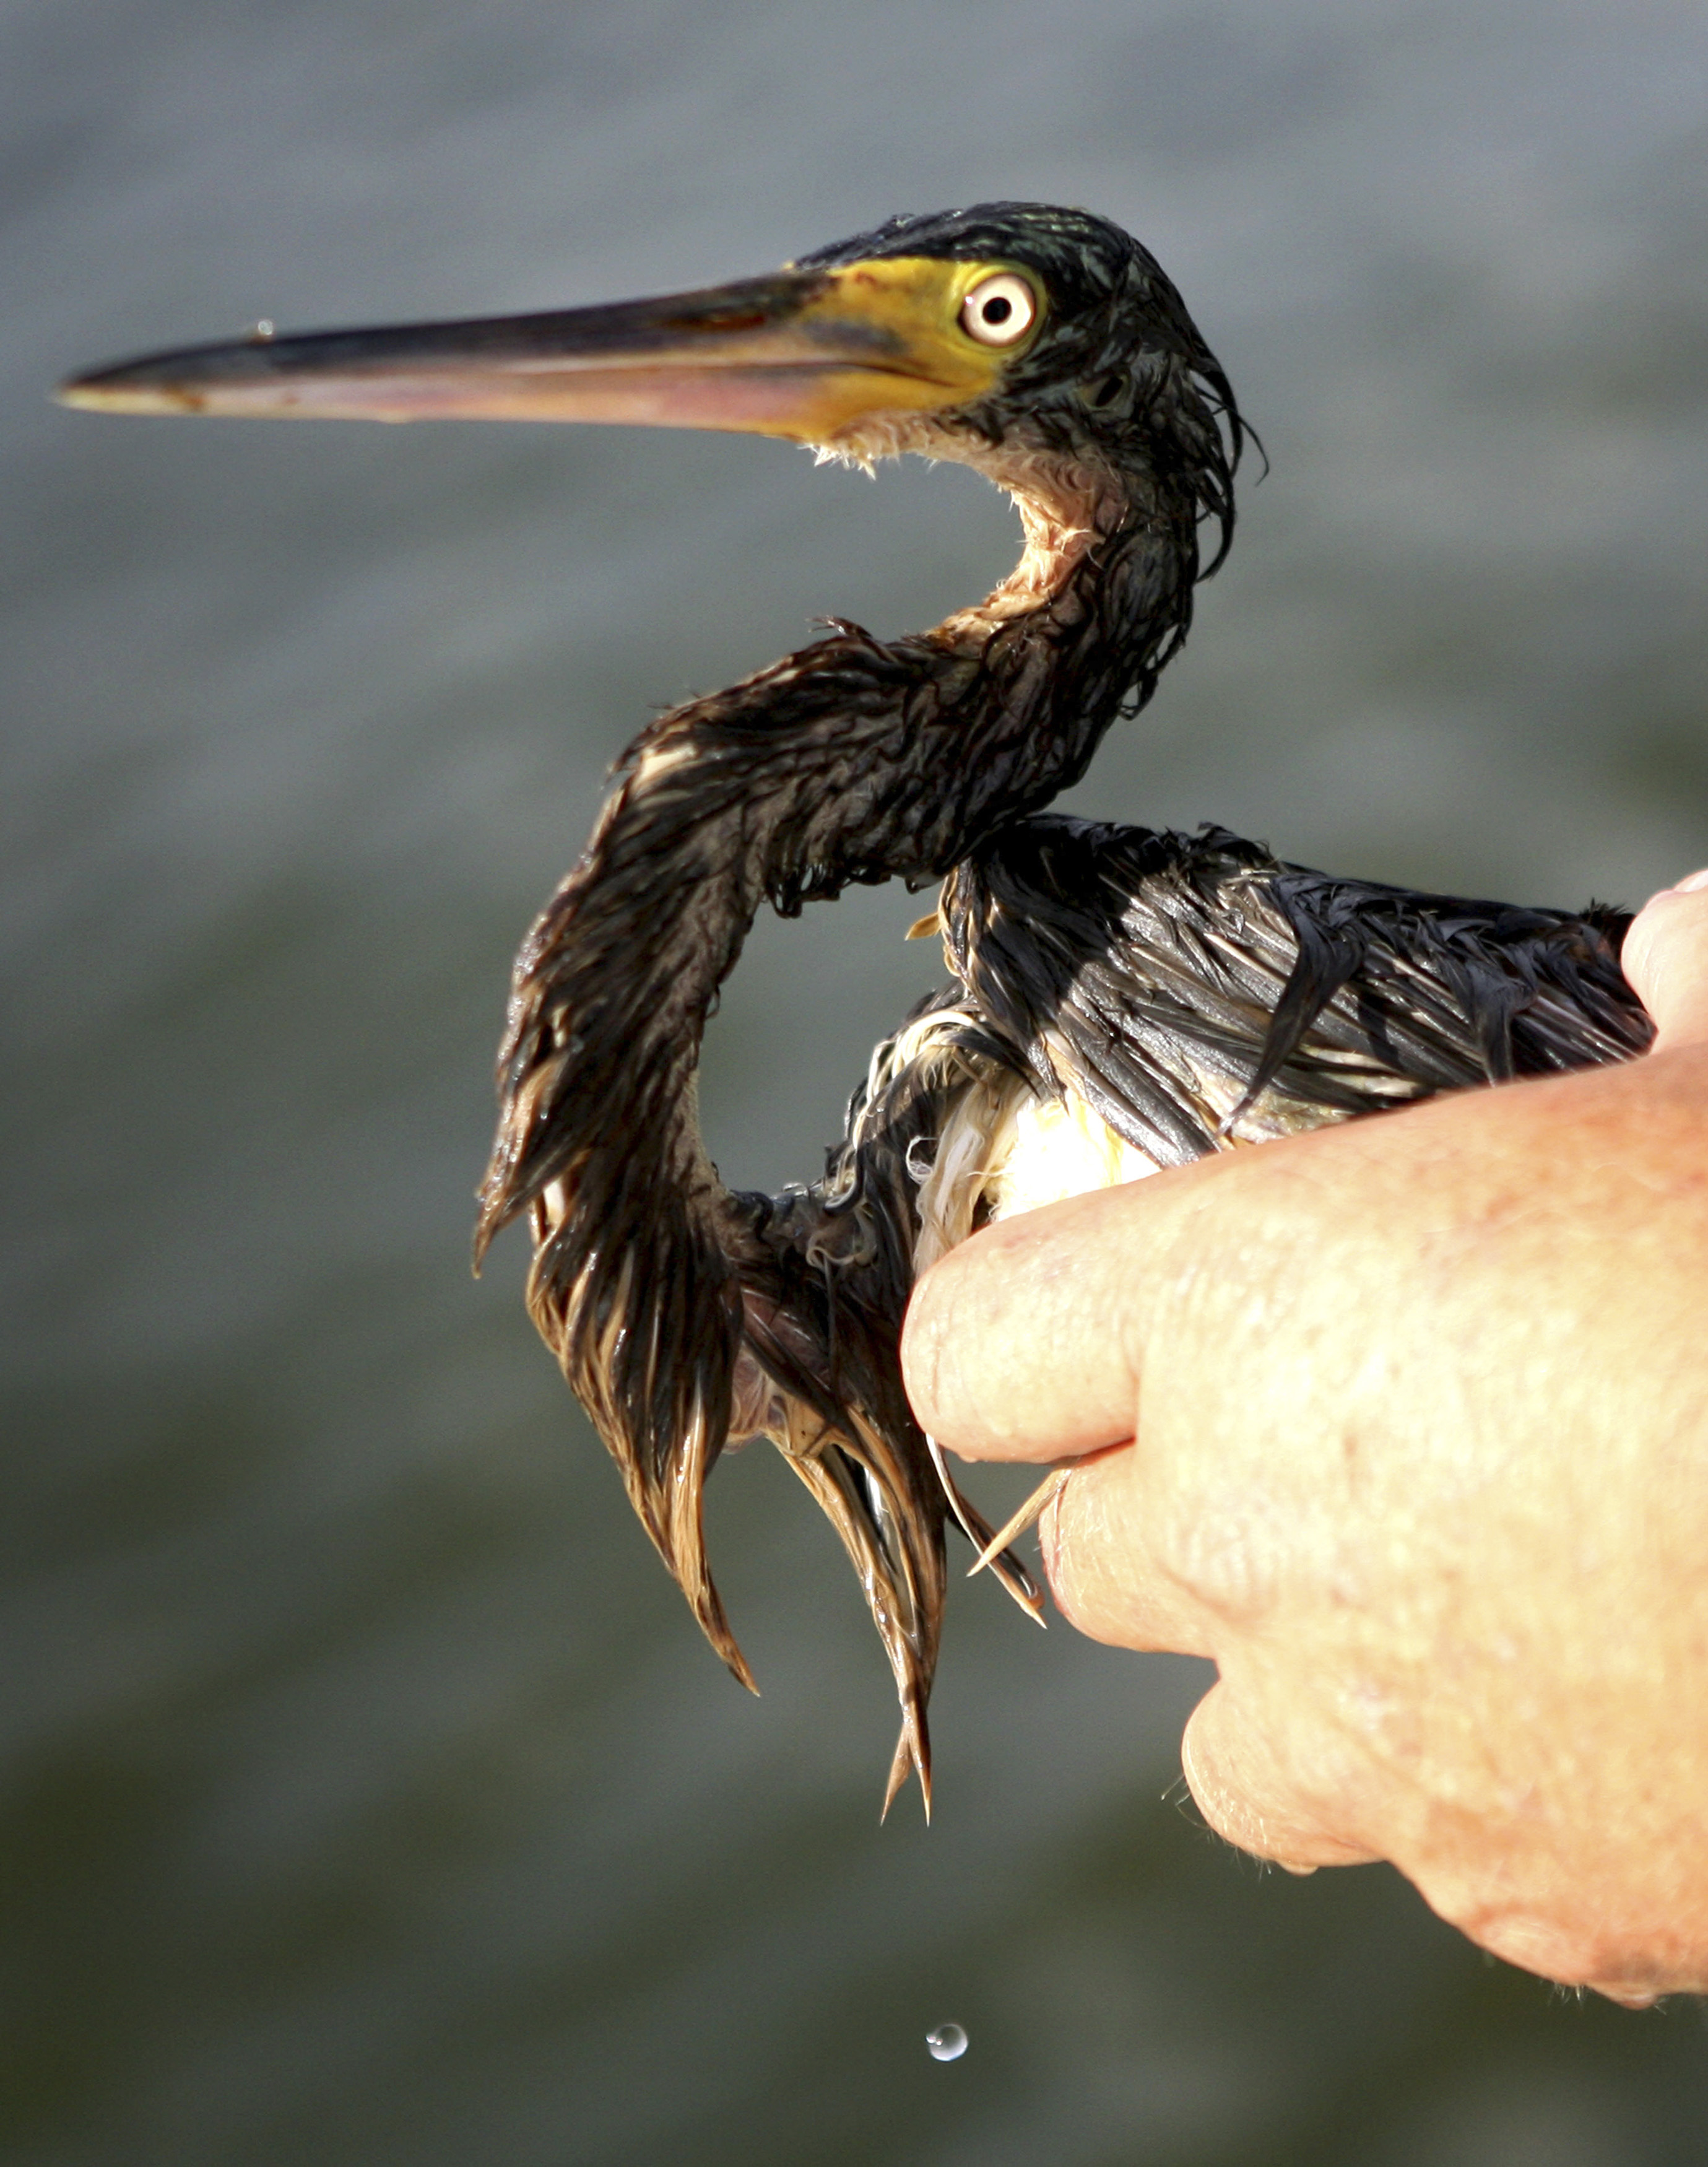 Plaquemines Parish Coastal Zone Director P. J. Hahan holds a tri-colored heron after spotting the seriously oiled bird along Queen Bess Island near Grand Isle, Louisiana July 17, 2010. The BP oil spill has been called one of the largest environmental disasters in American history. (Sean Gardner&mdash;Reuters)